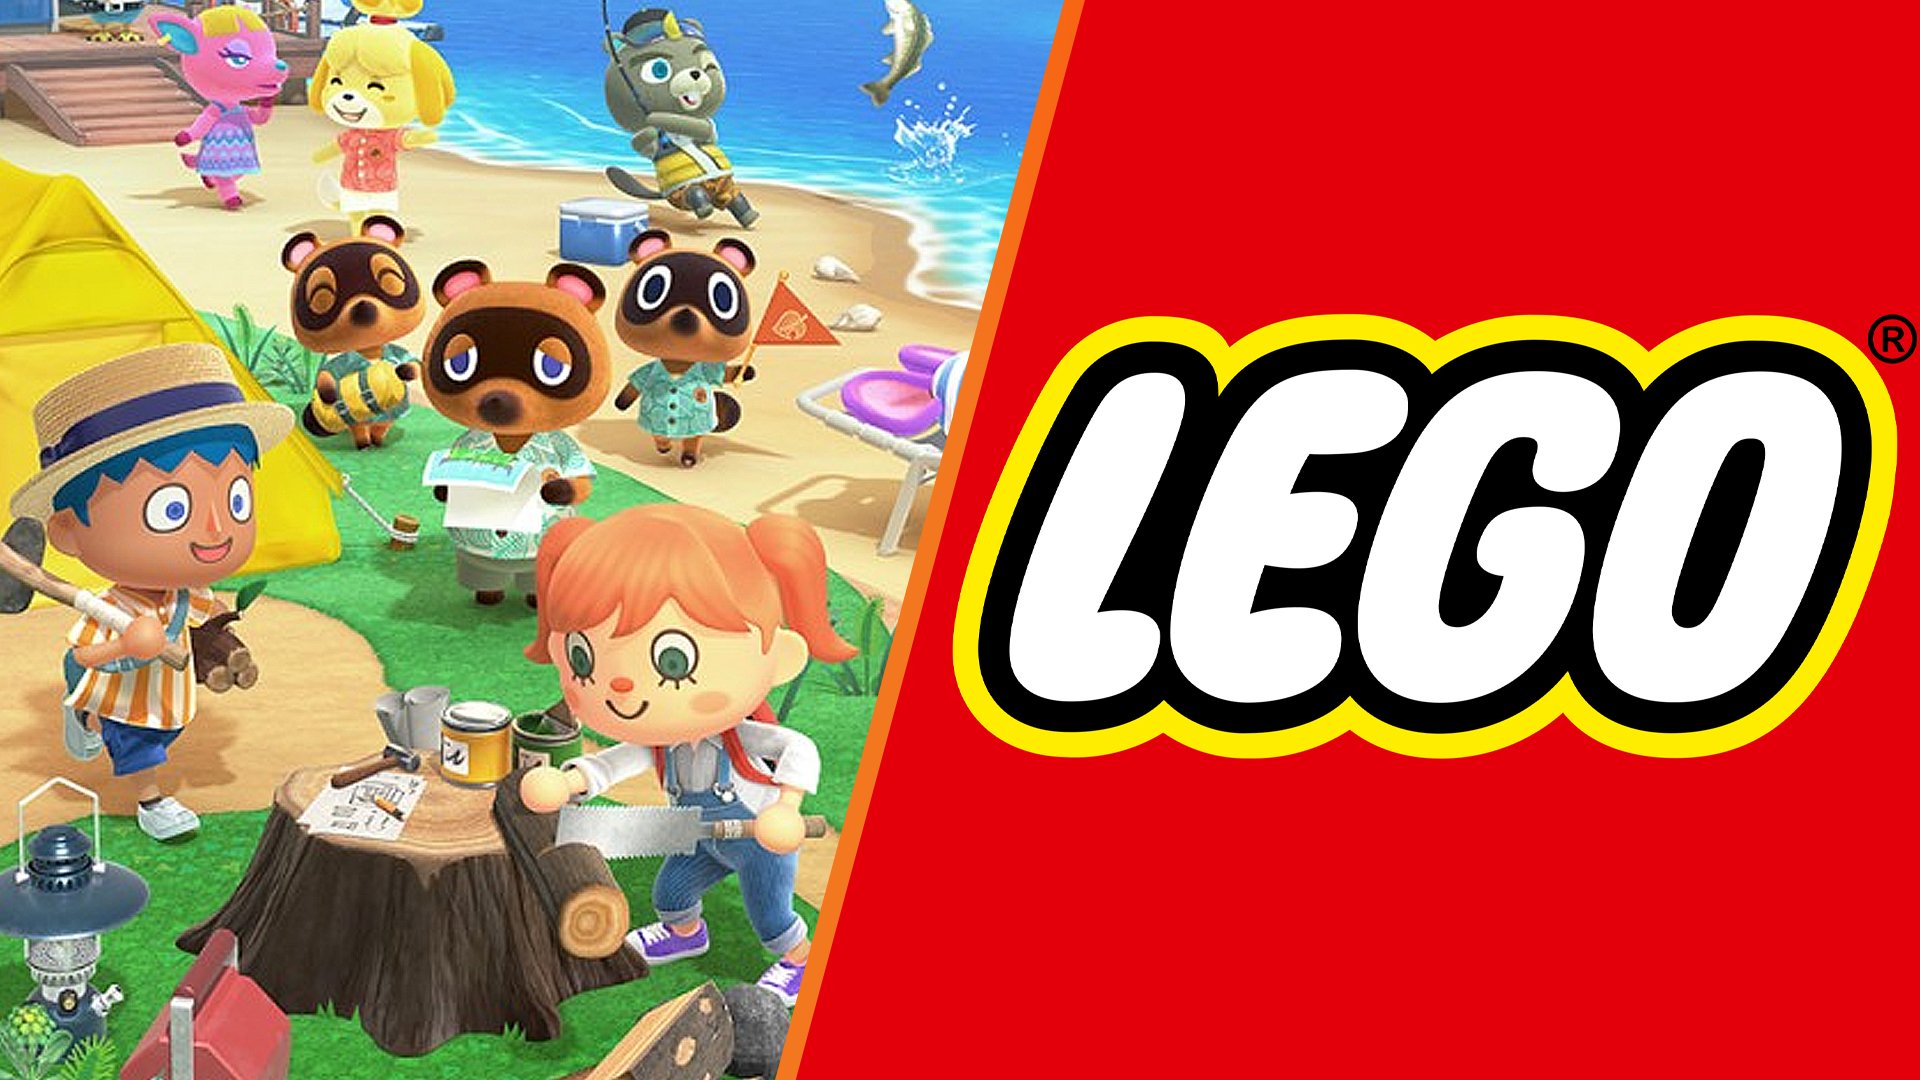 Lego Animal Crossing sets are coming next year, Lego insiders claim